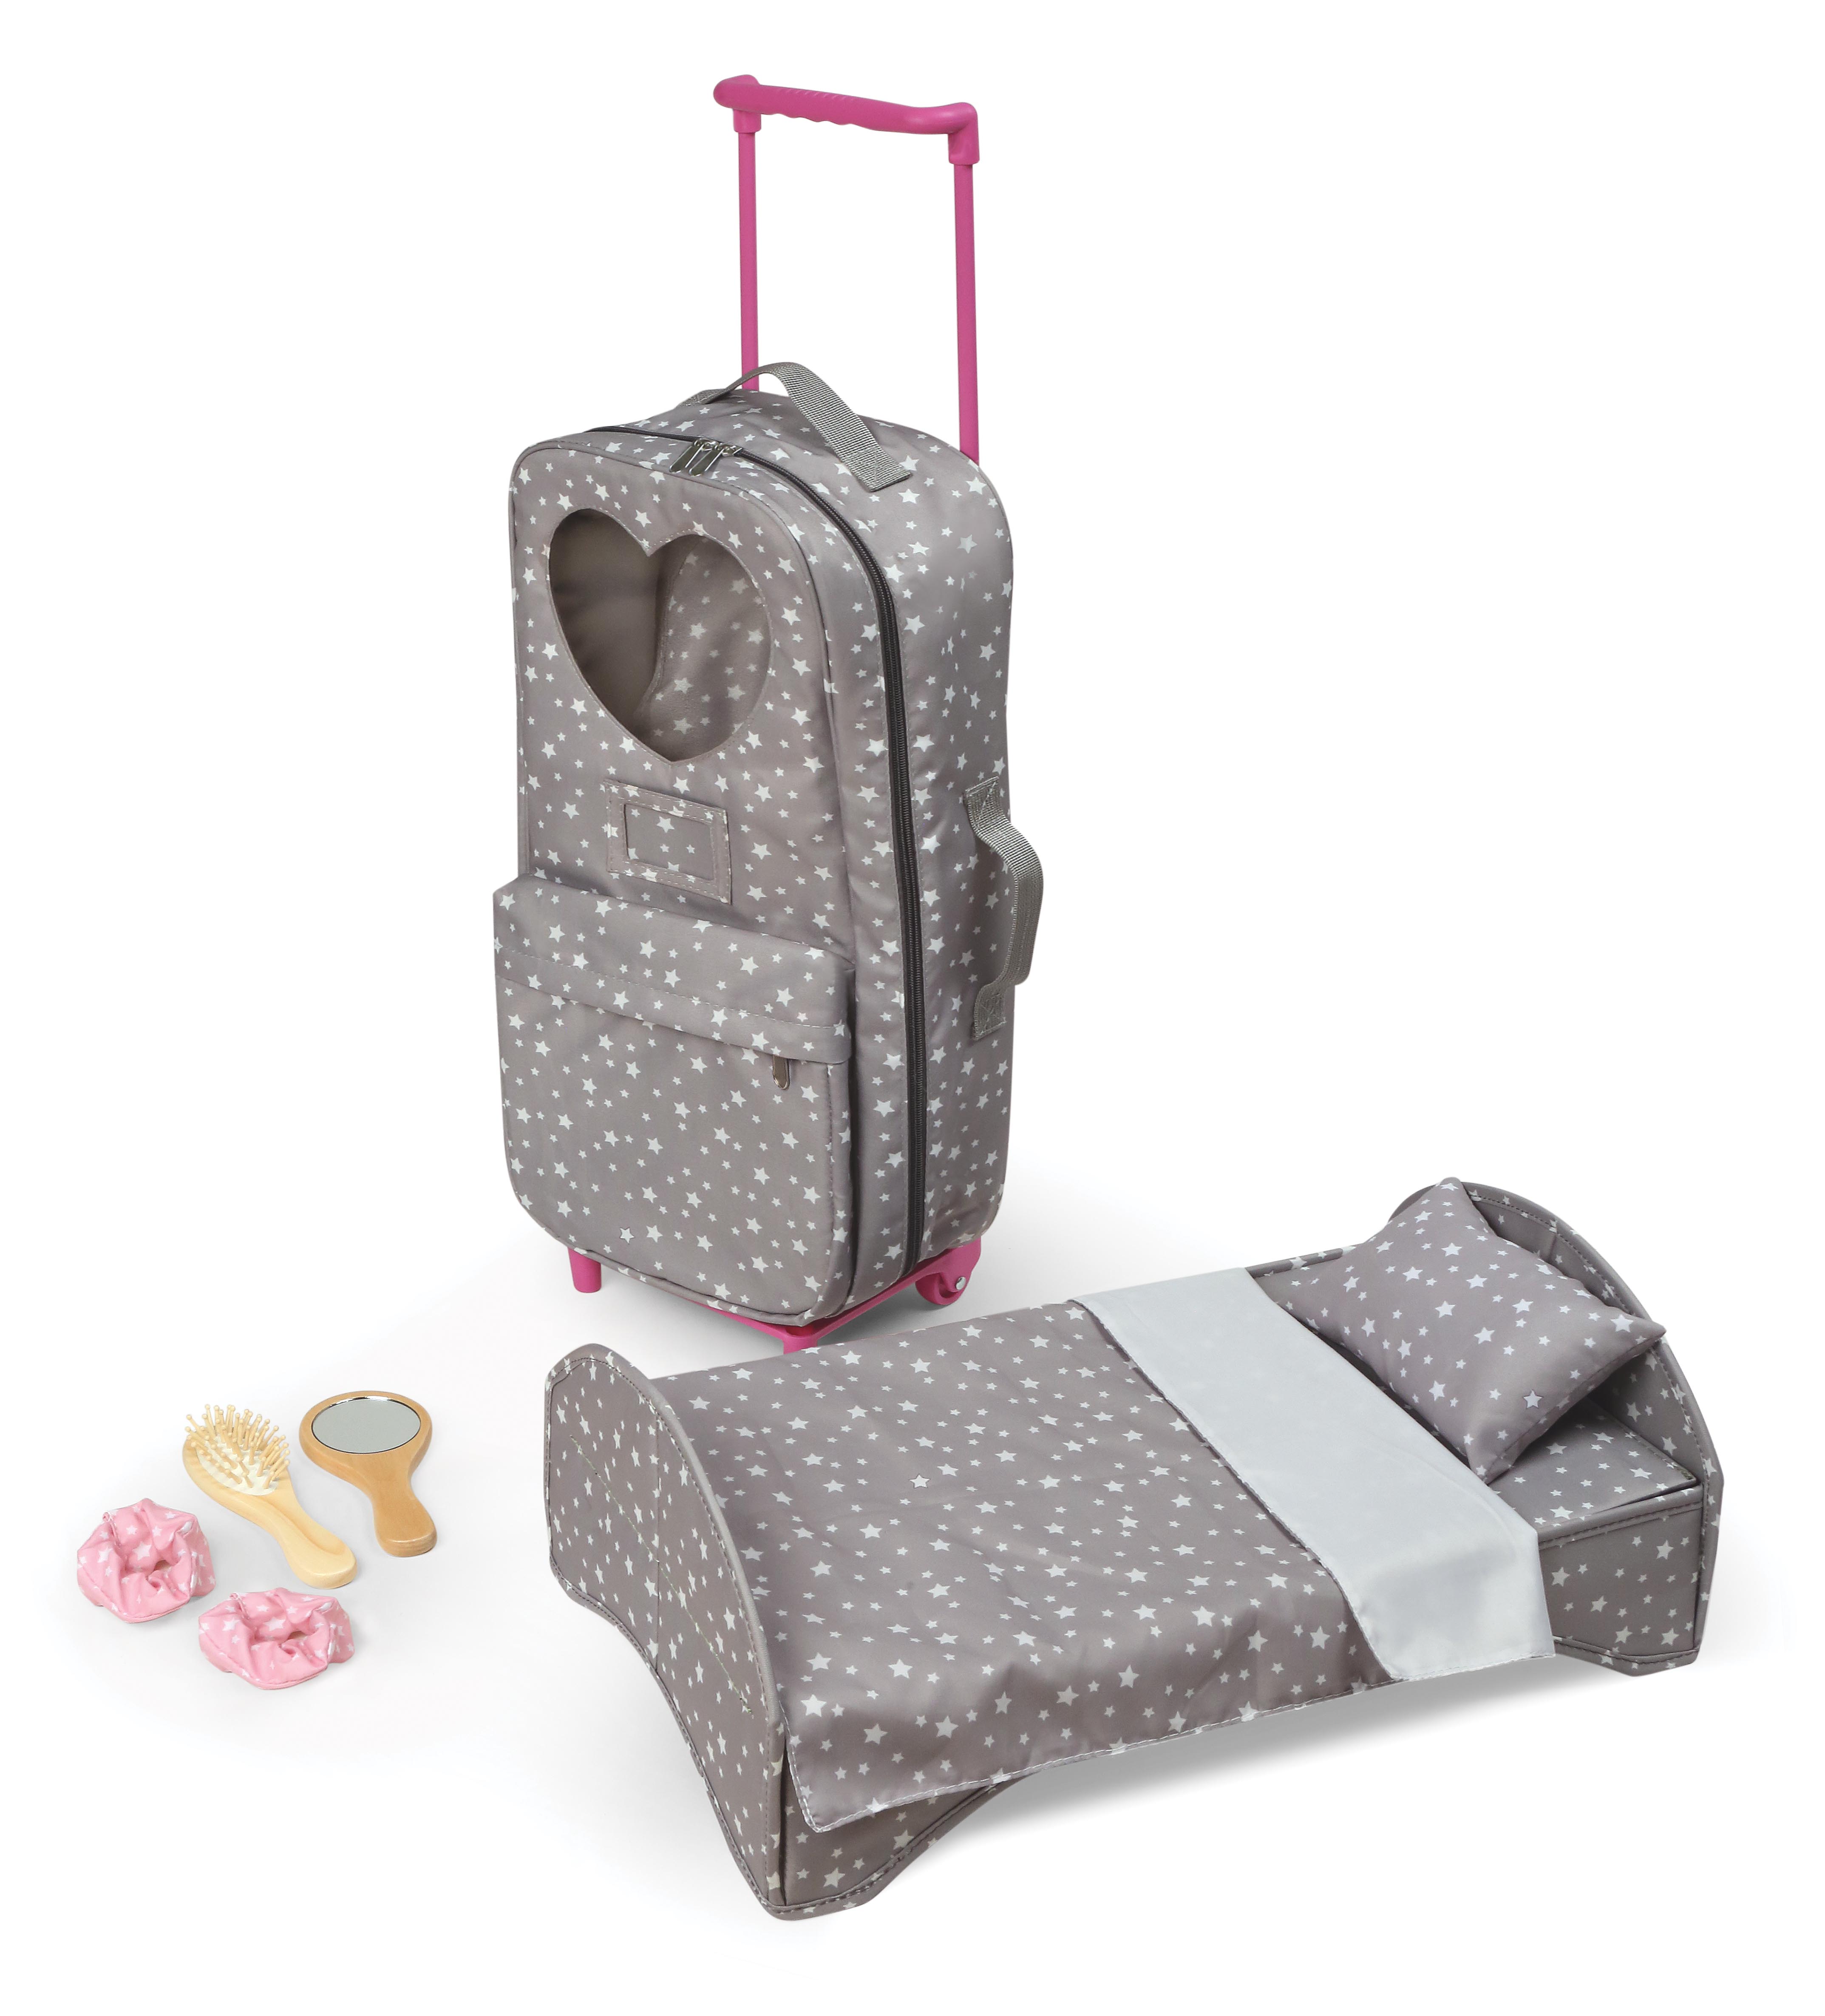 Travel and Tour Trolley Carrier with Bed for 18-inch Dolls - Gray/Stars